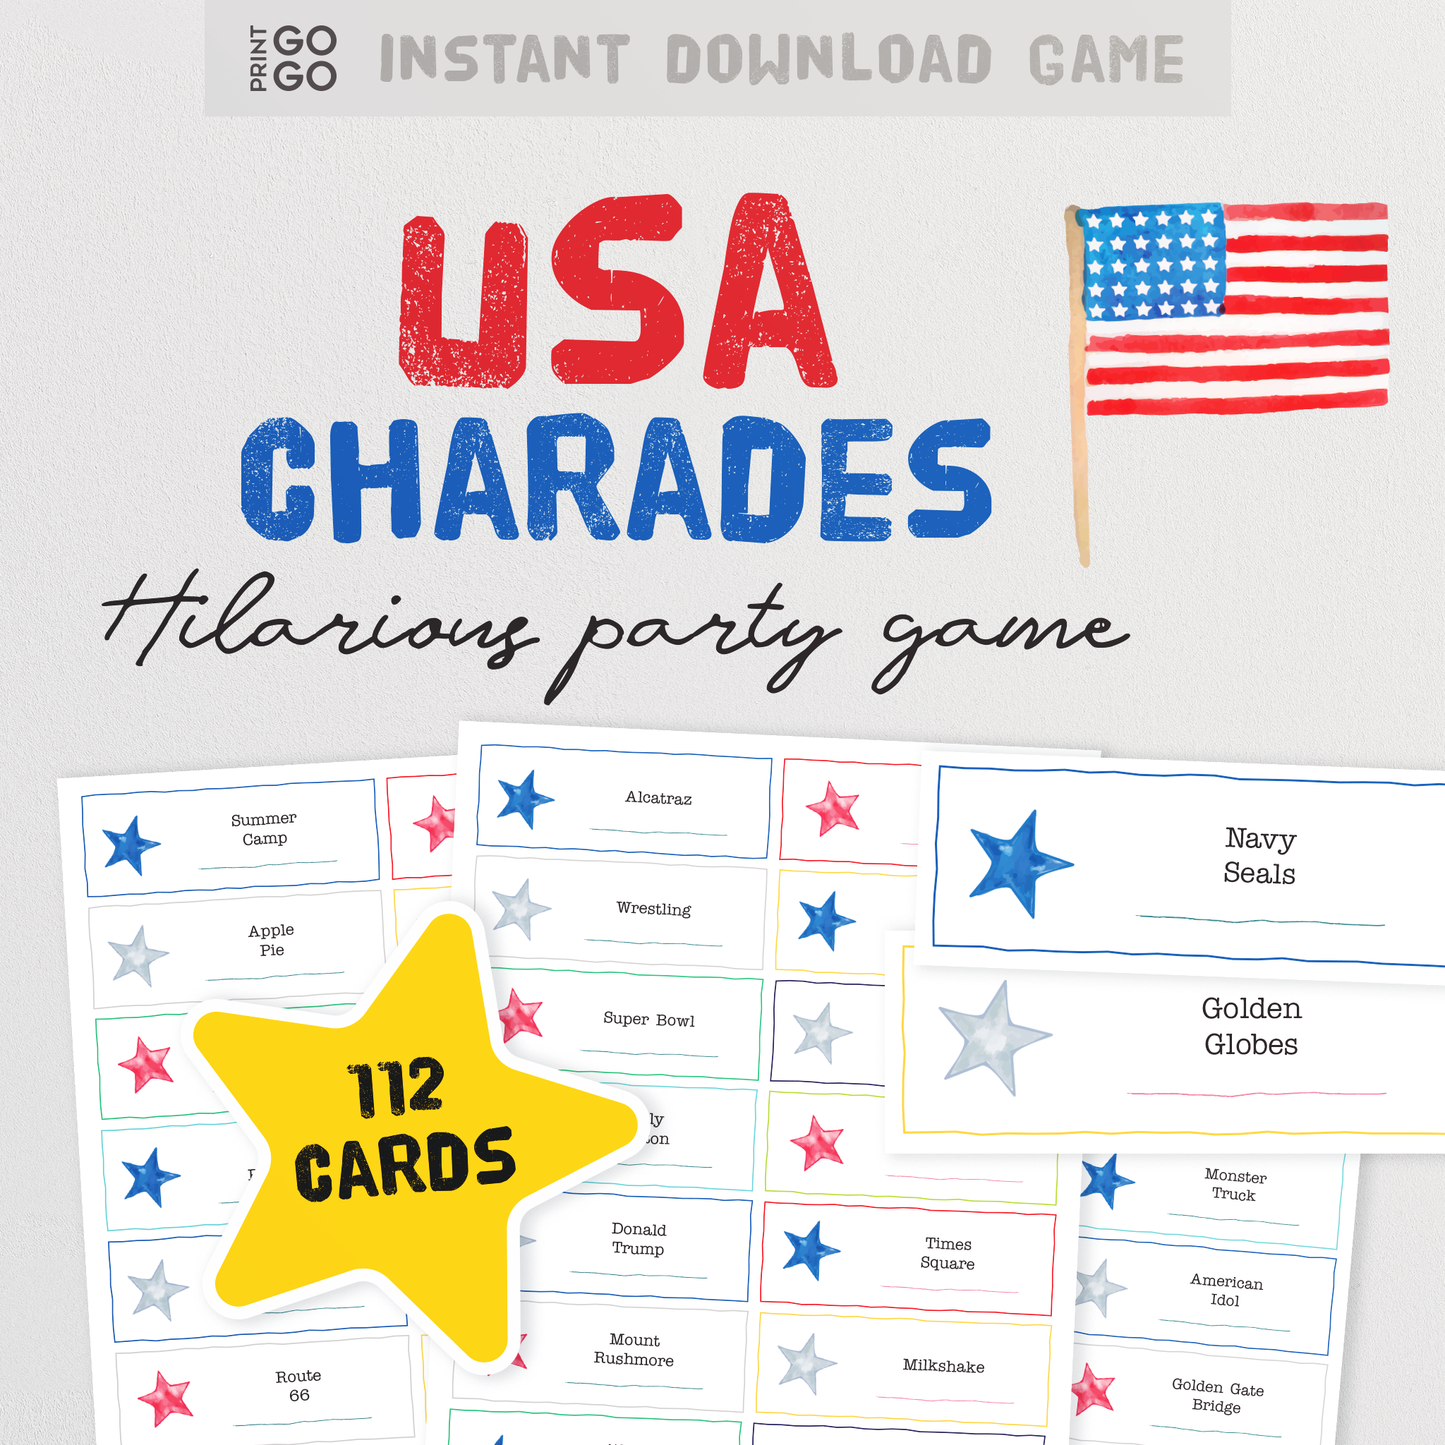 USA Charades - The Fun Family Party Game of Acting Out and Guessing Phrases